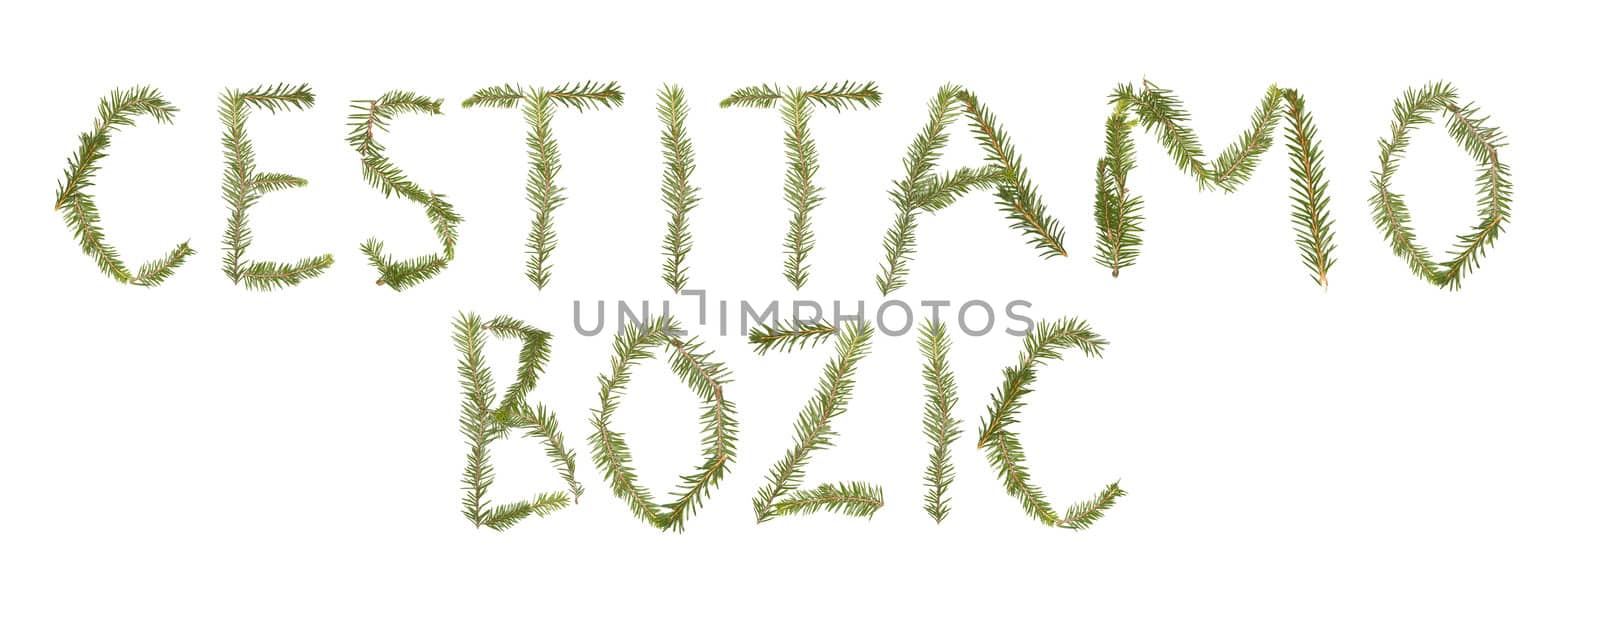 Spruce twigs forming the phrase 'Cestitamo Bozic' isolated on white